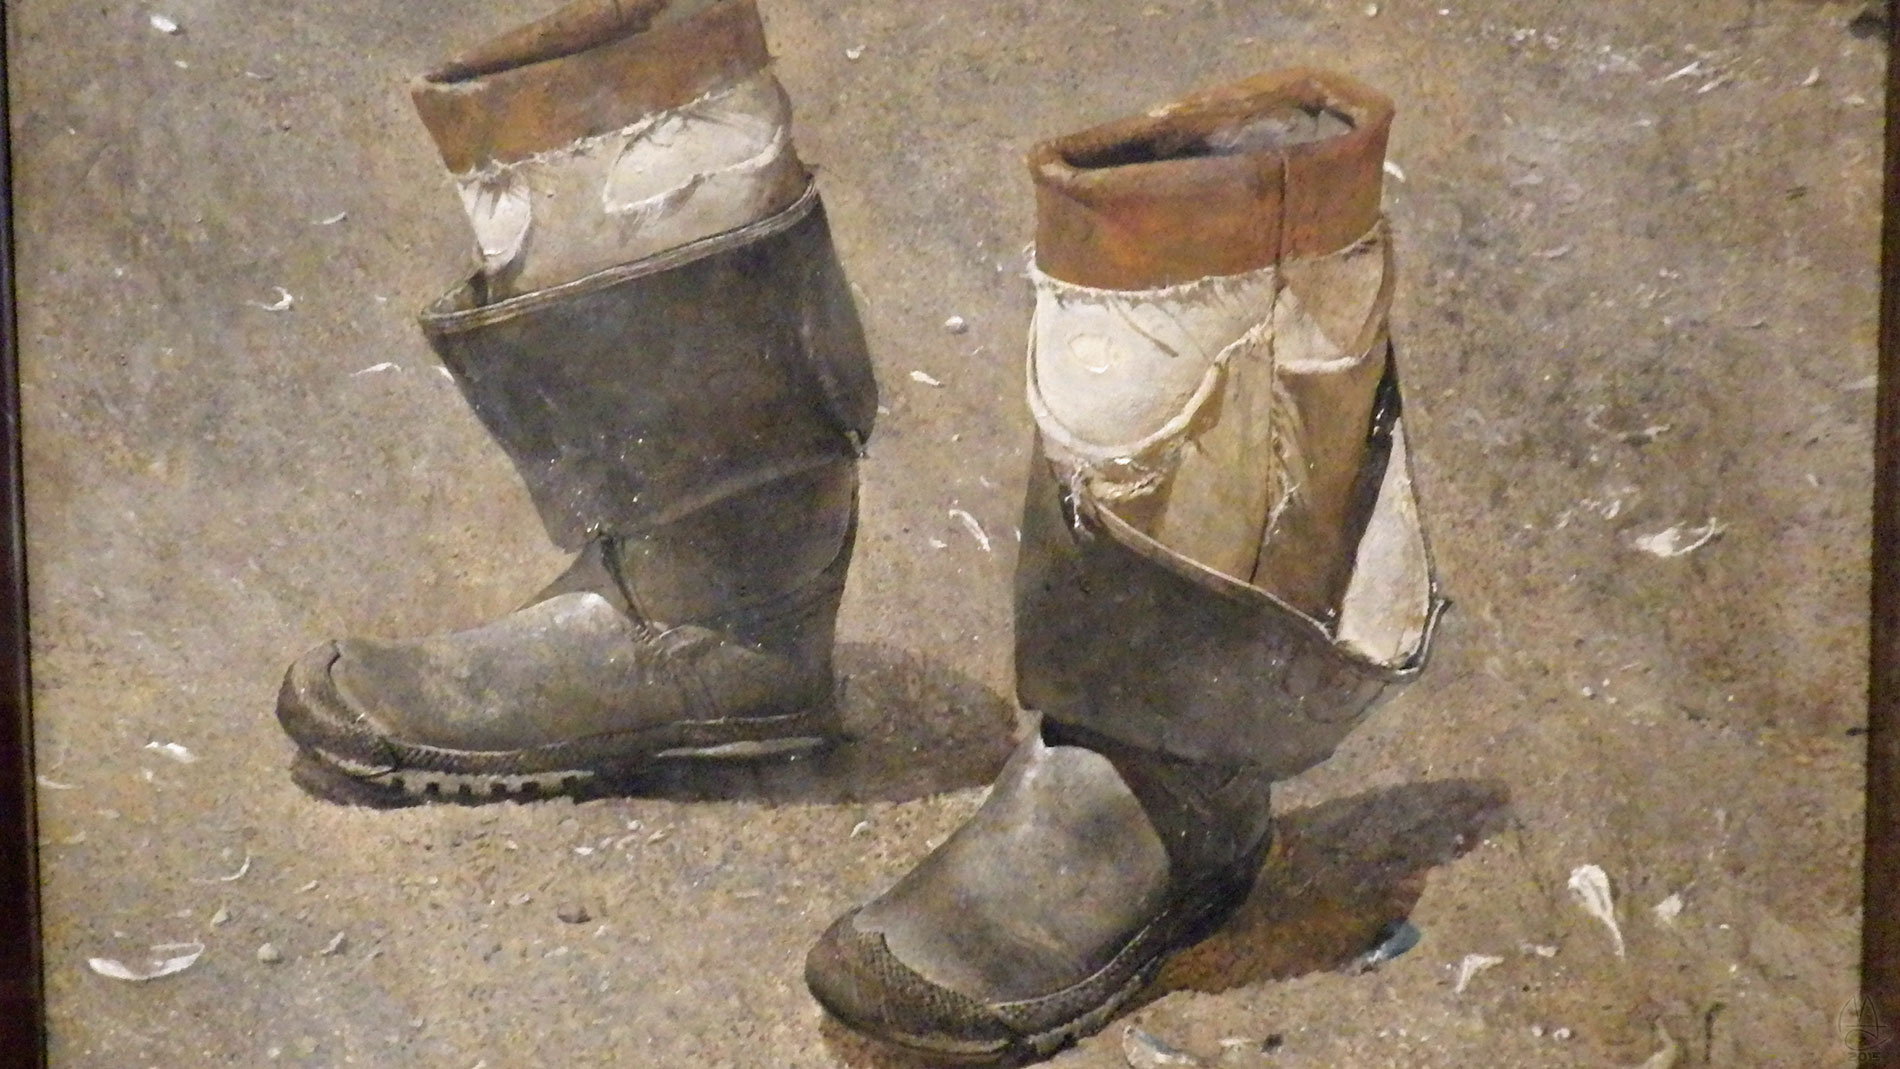 Seaman's Boots. Painting by  Andrew Wyeth 1976